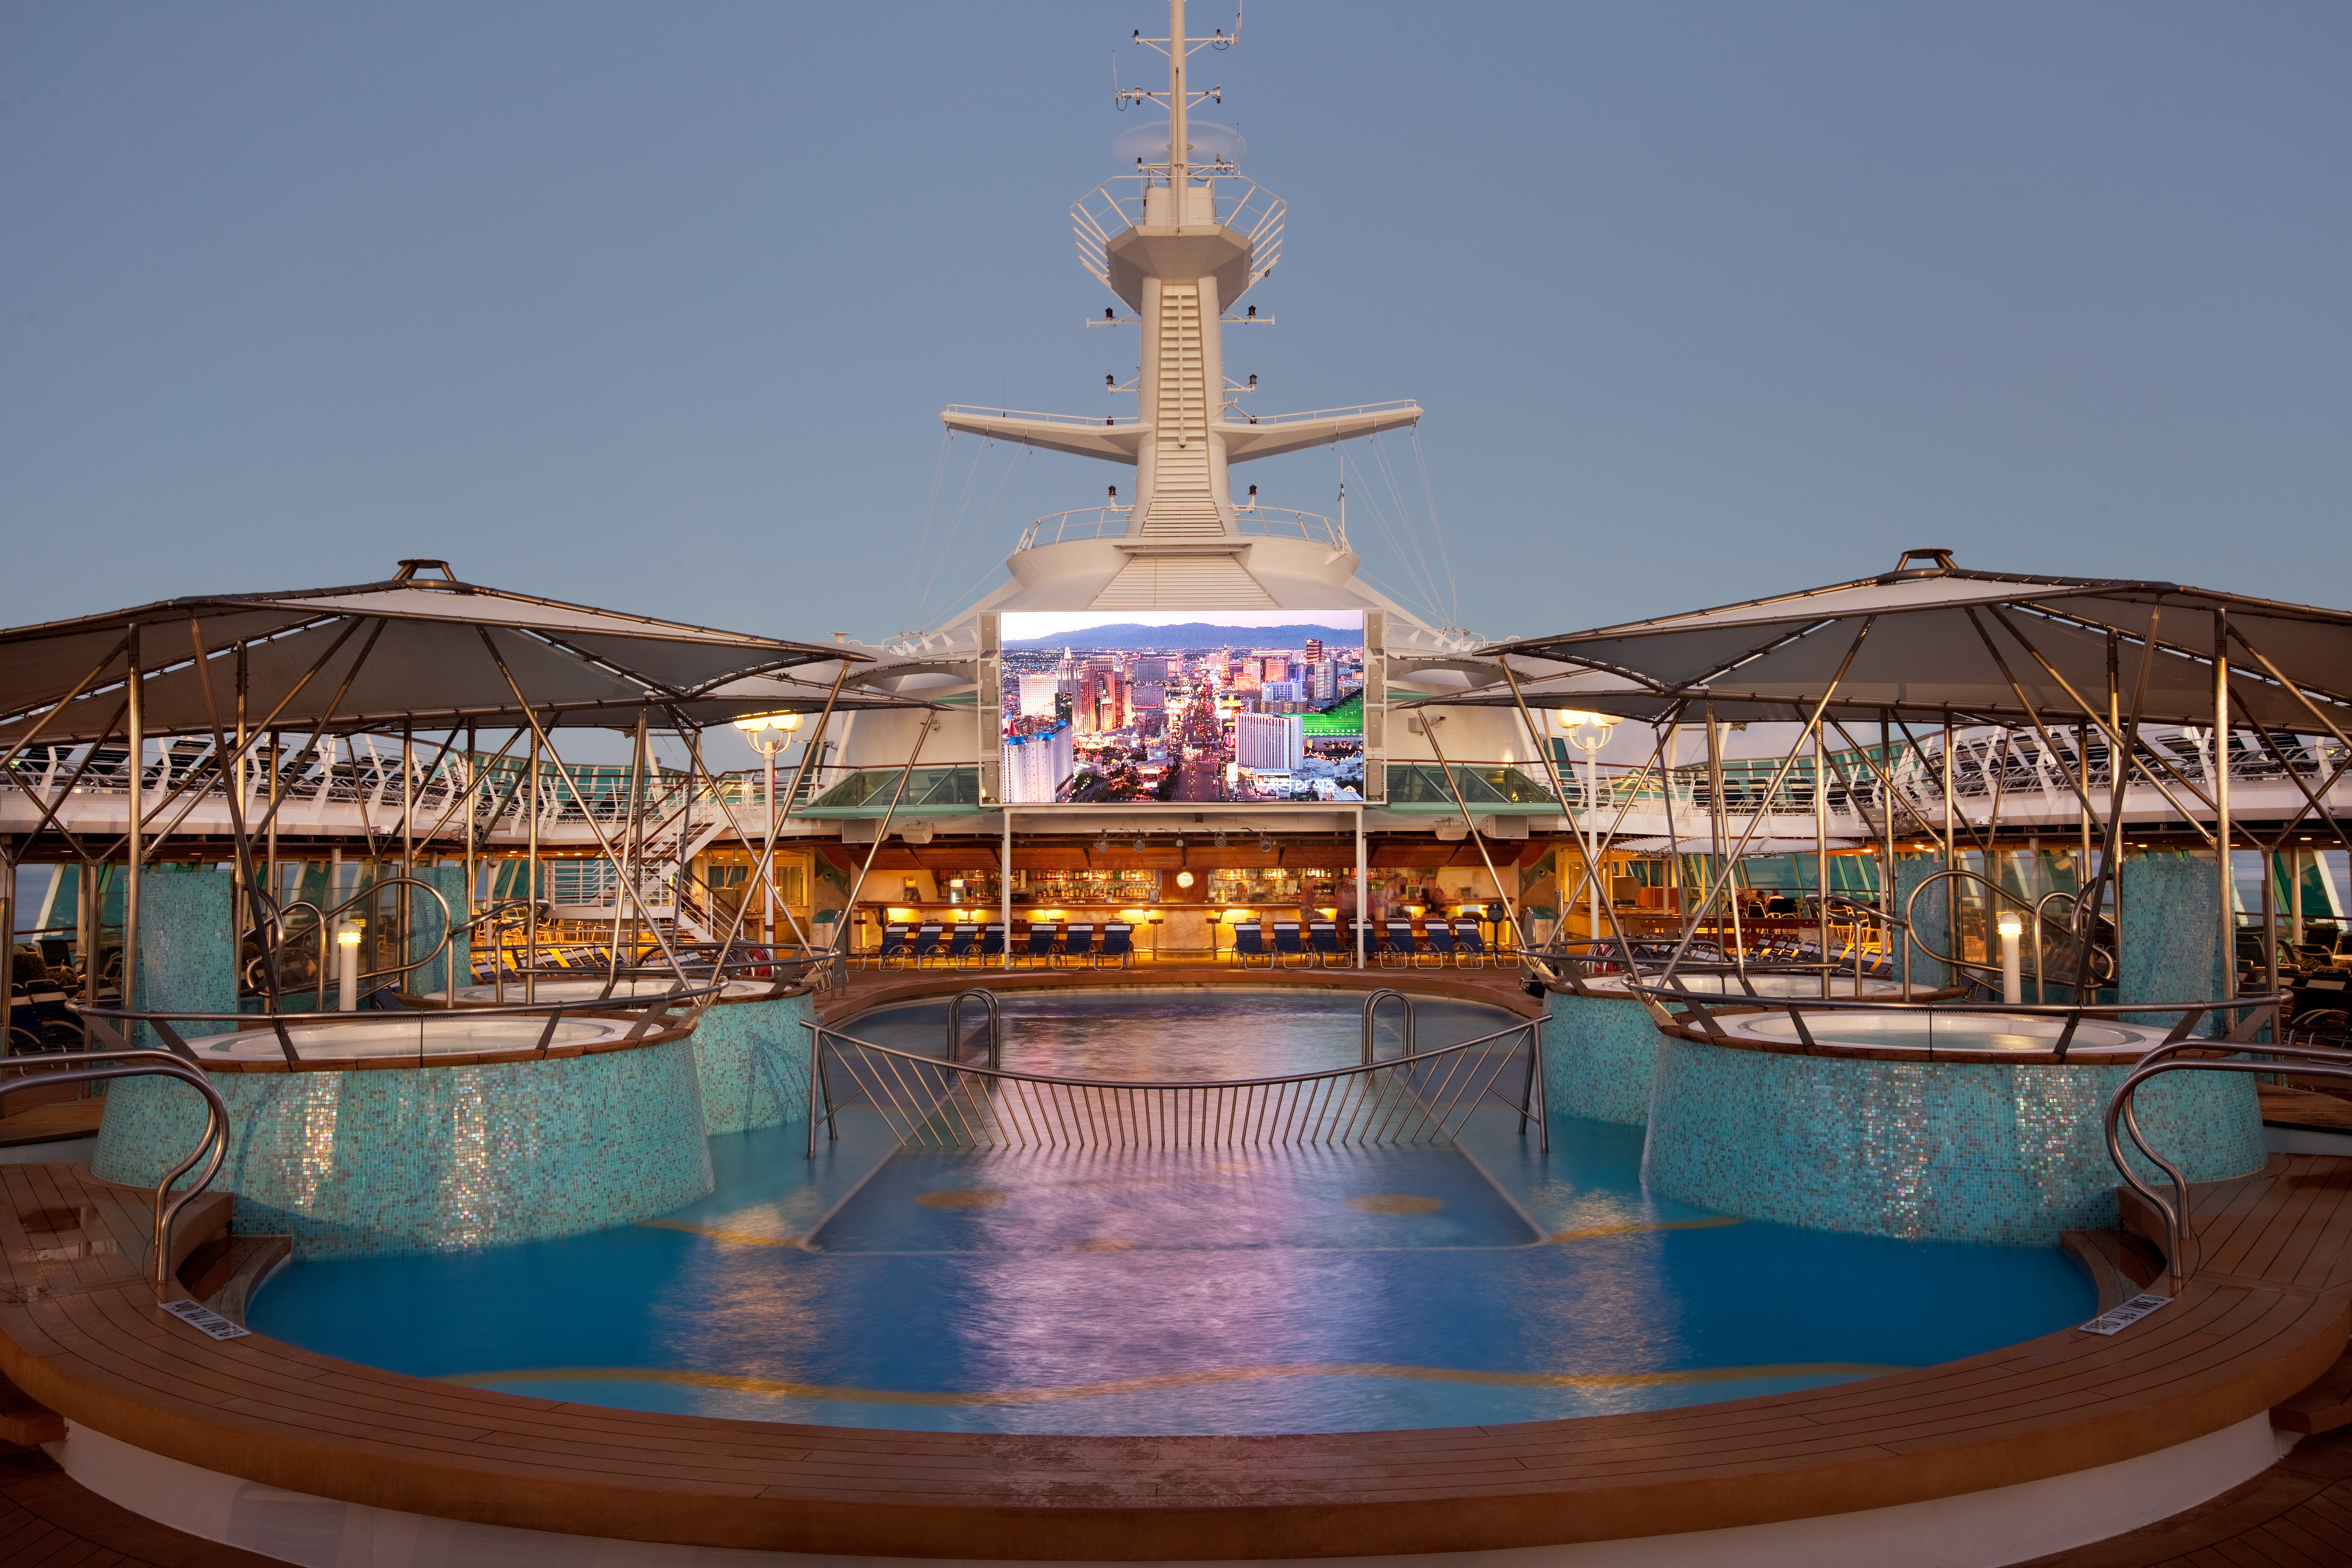 Outdoor Movies in Pool Deck Area Rhapsody of the Seas 